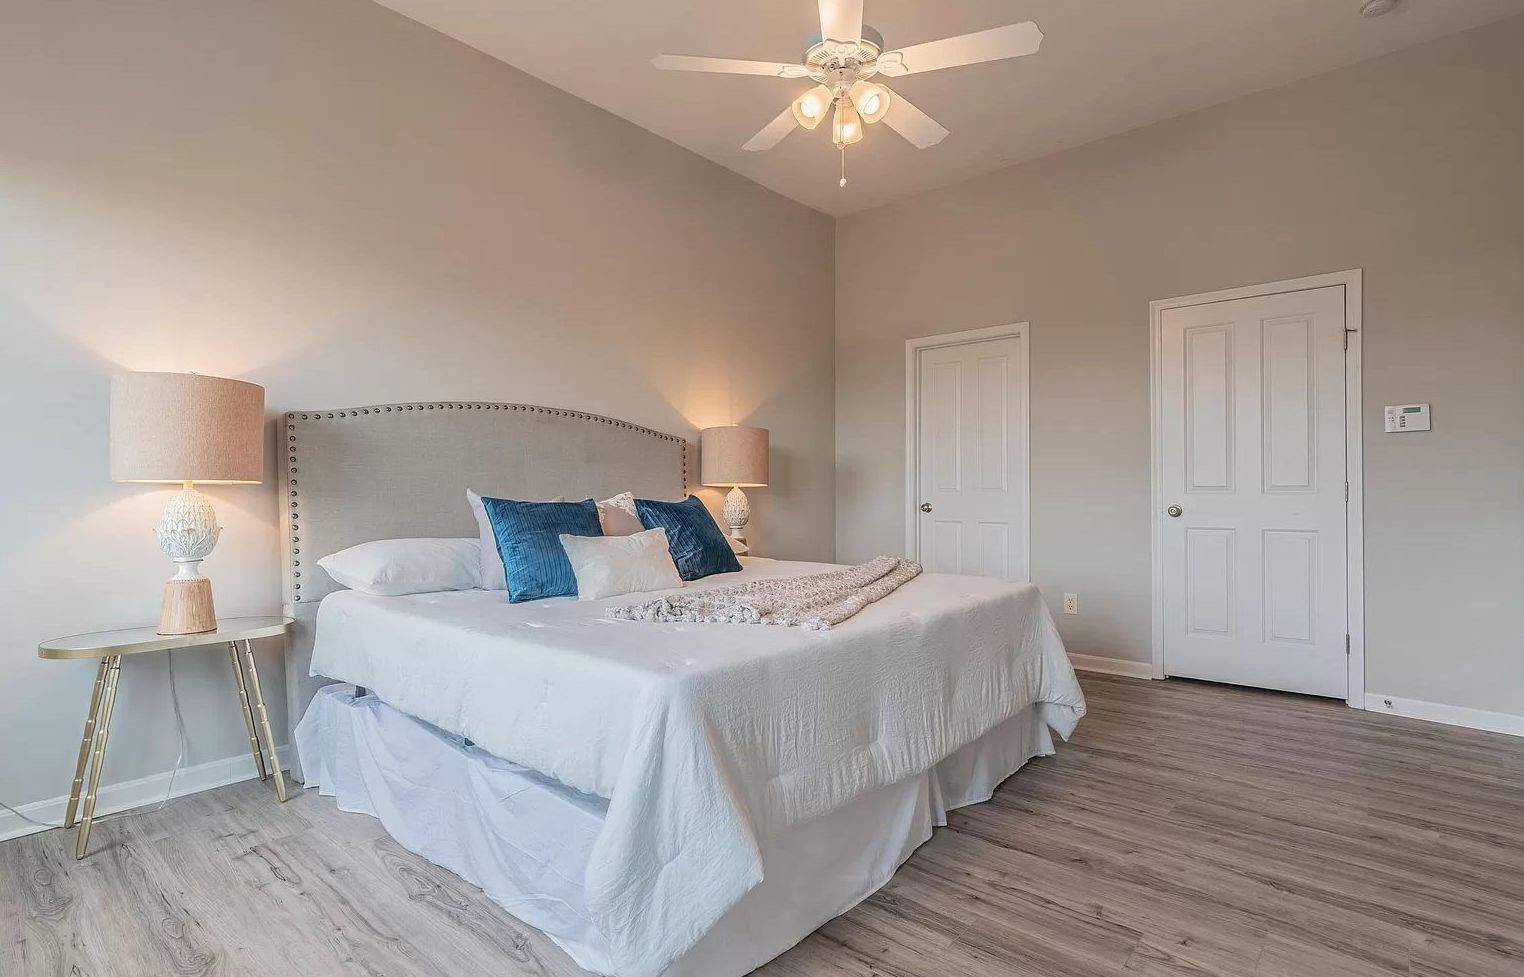 Southgate Townhomes - Bedroom with bed and celling fan